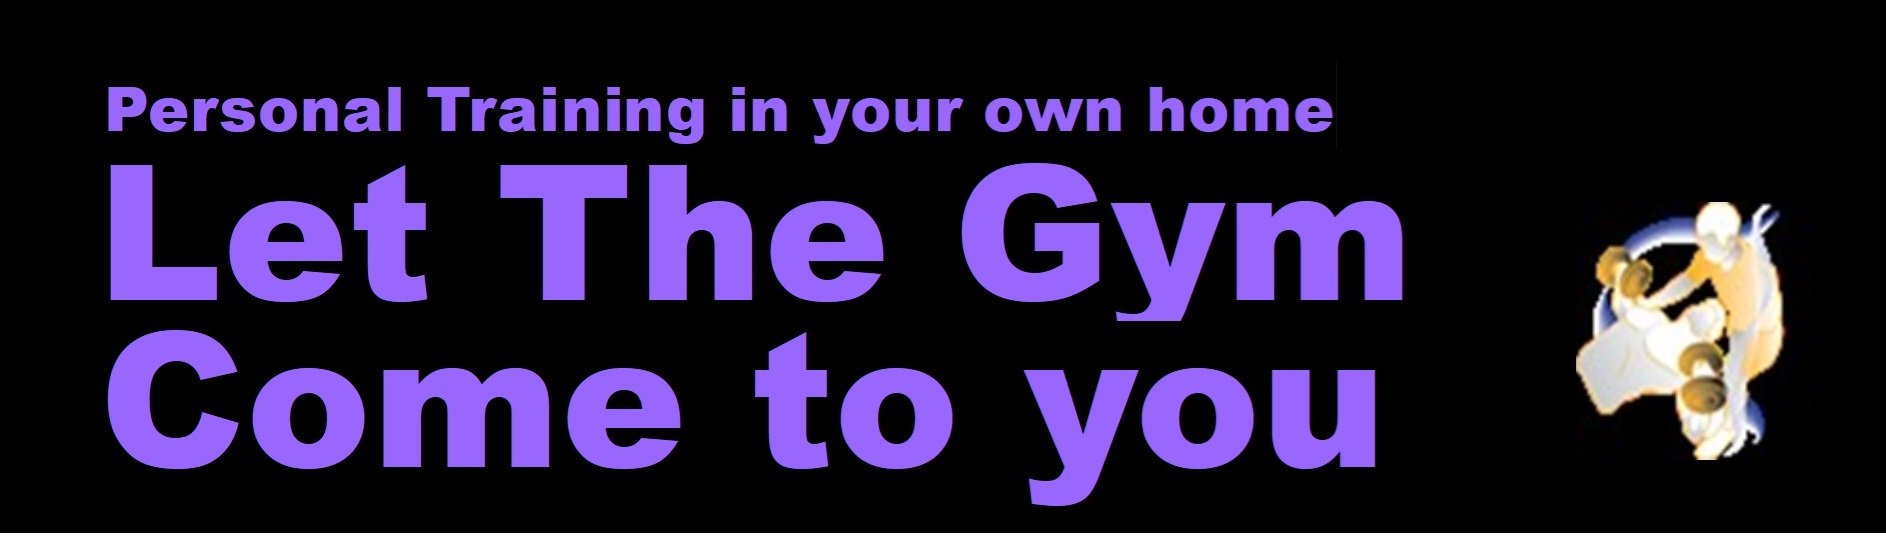 Let The Gym Come To You